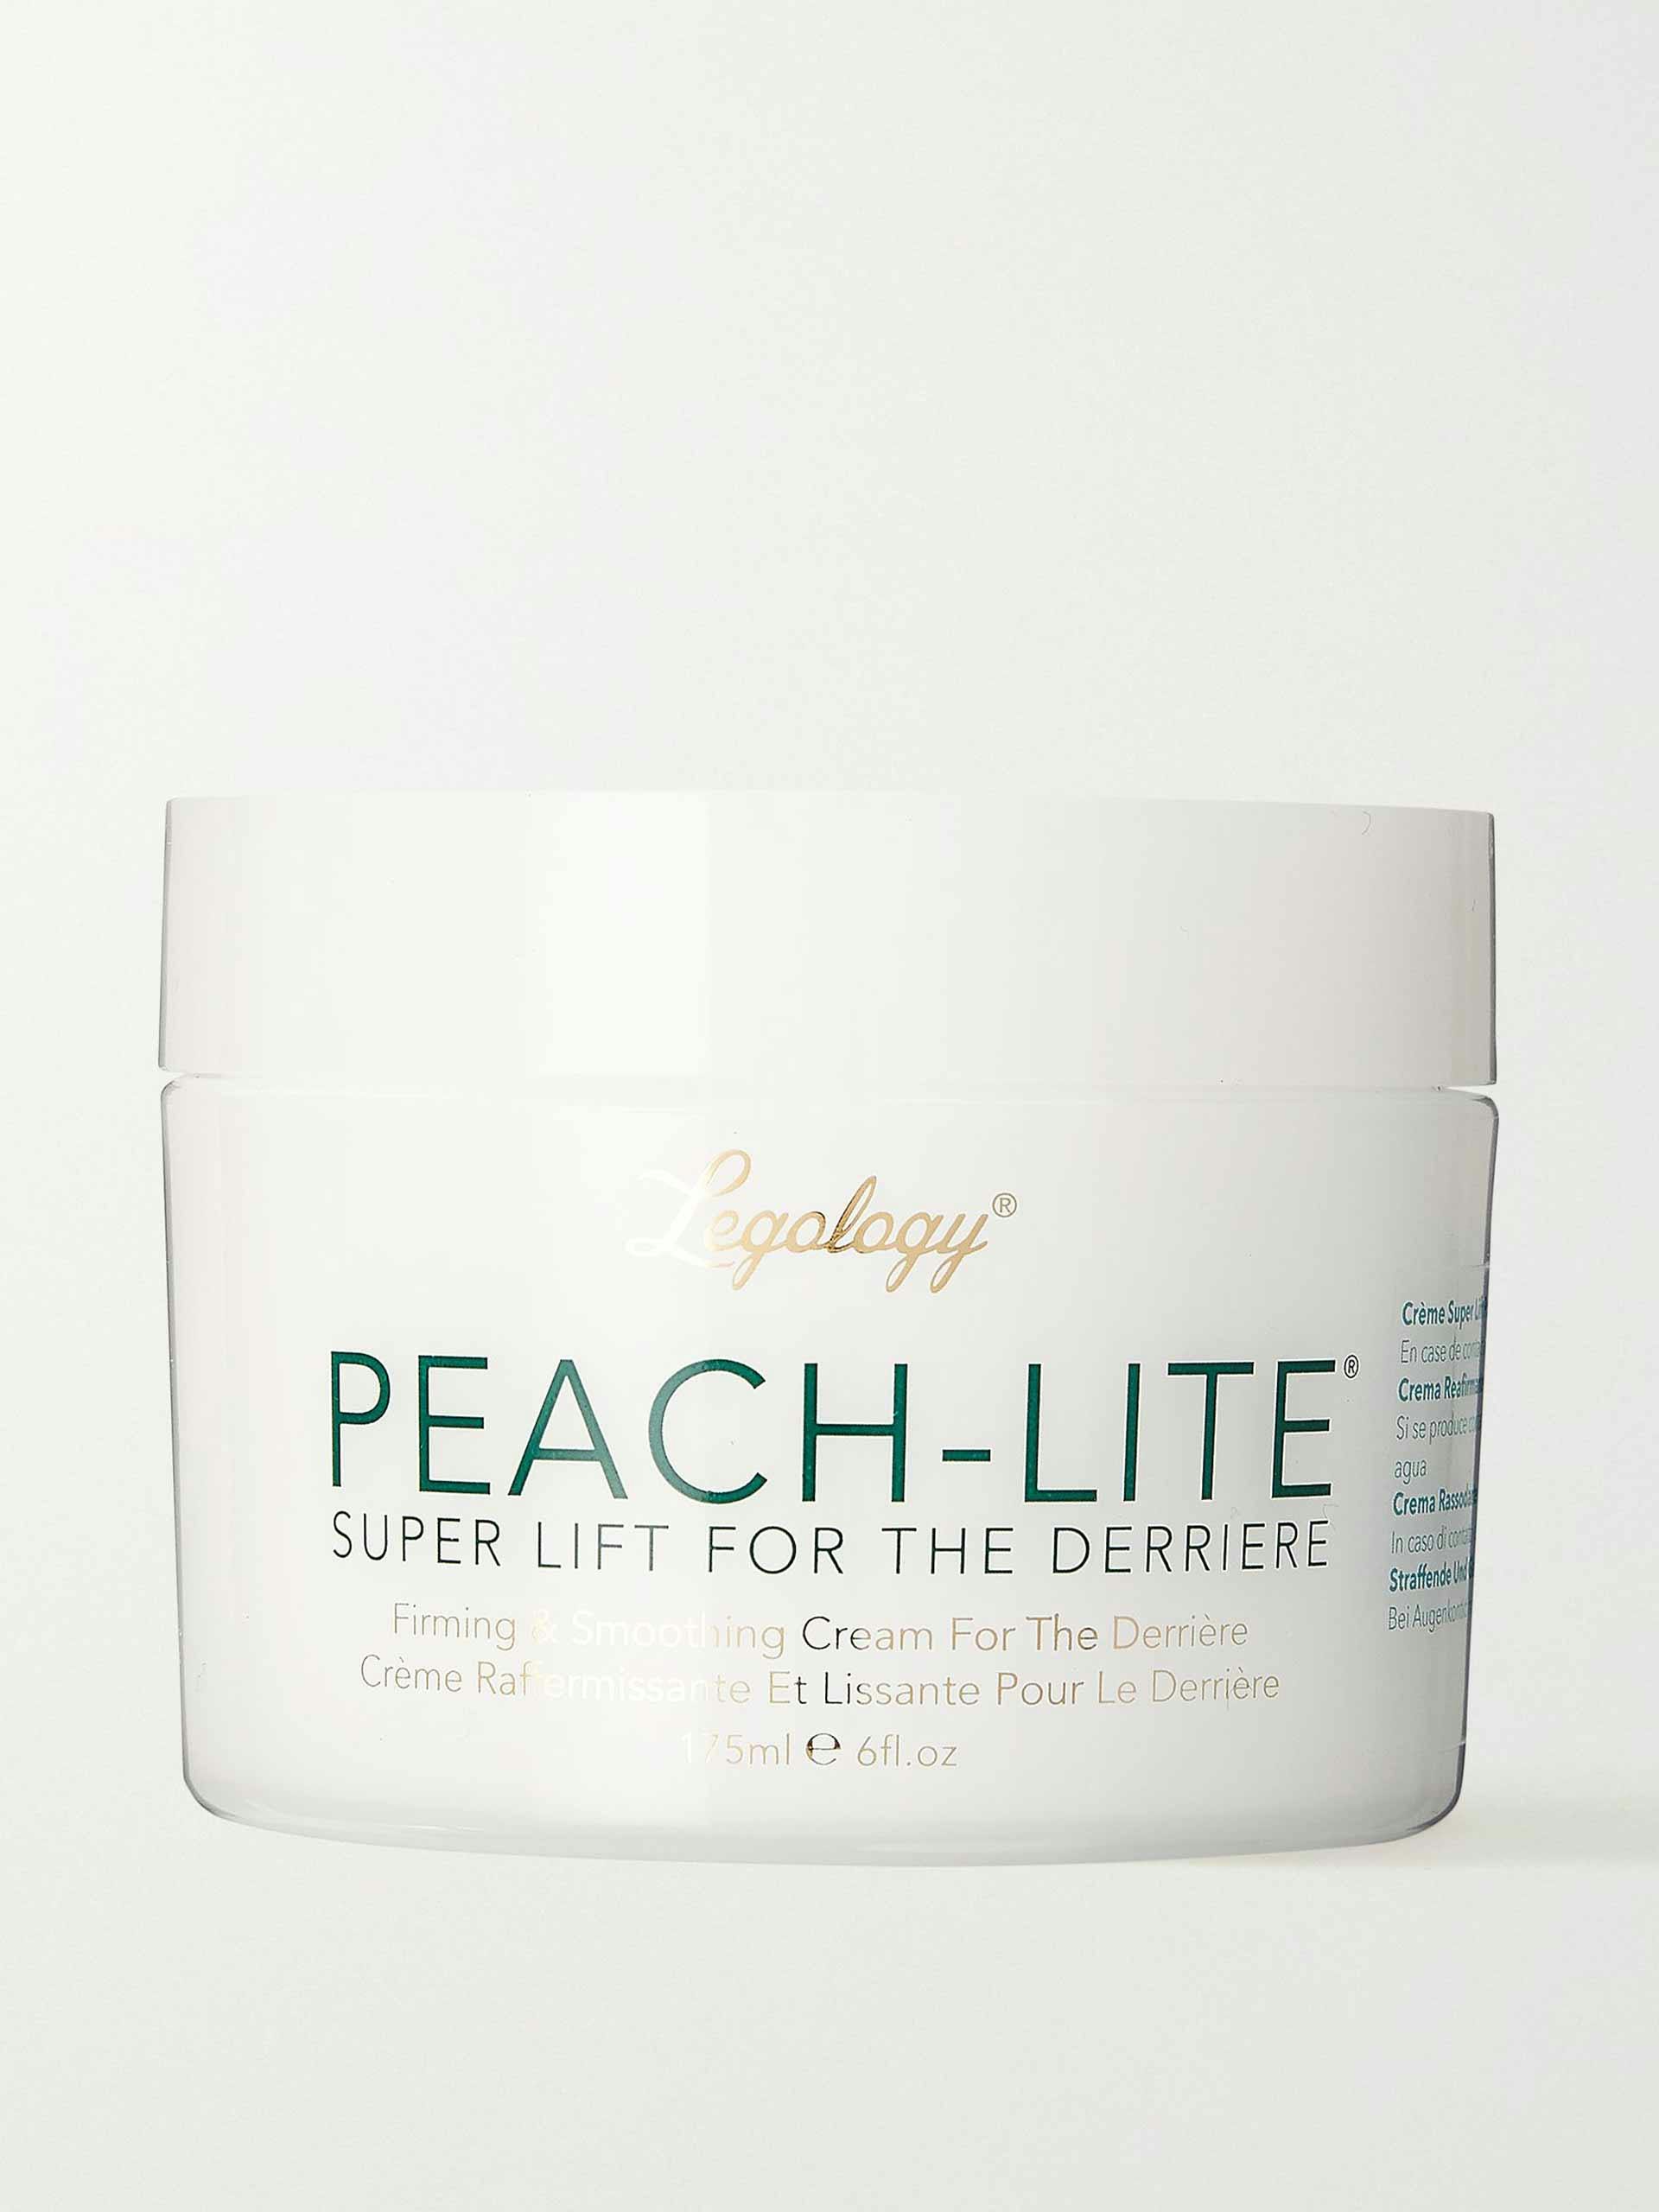 Firming and smoothing derriere cream